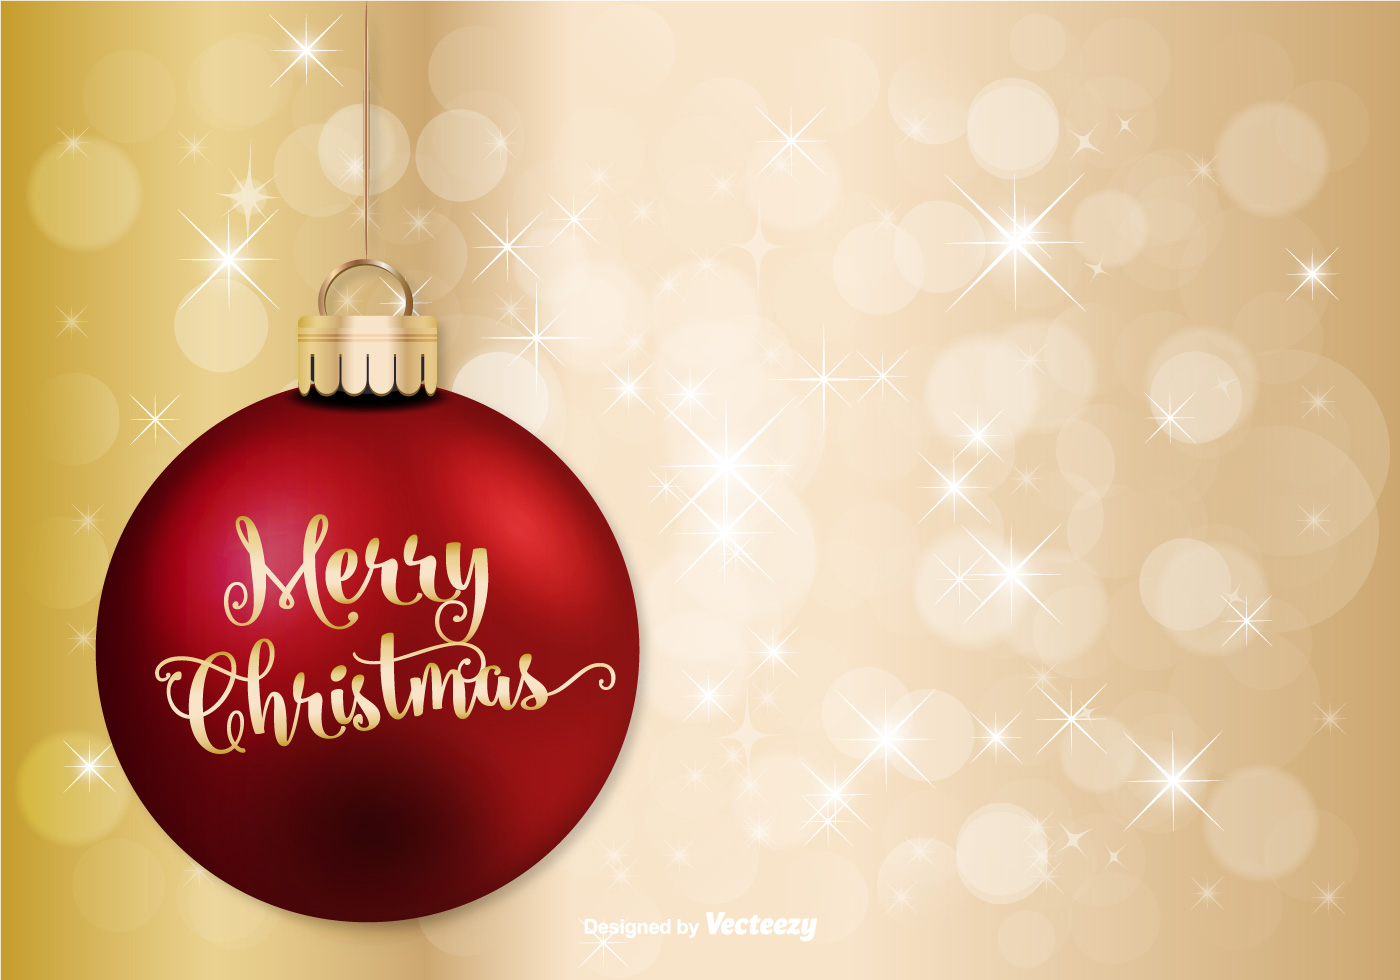 Christmas Ornament Free Vector Art - (13870 Free Downloads)